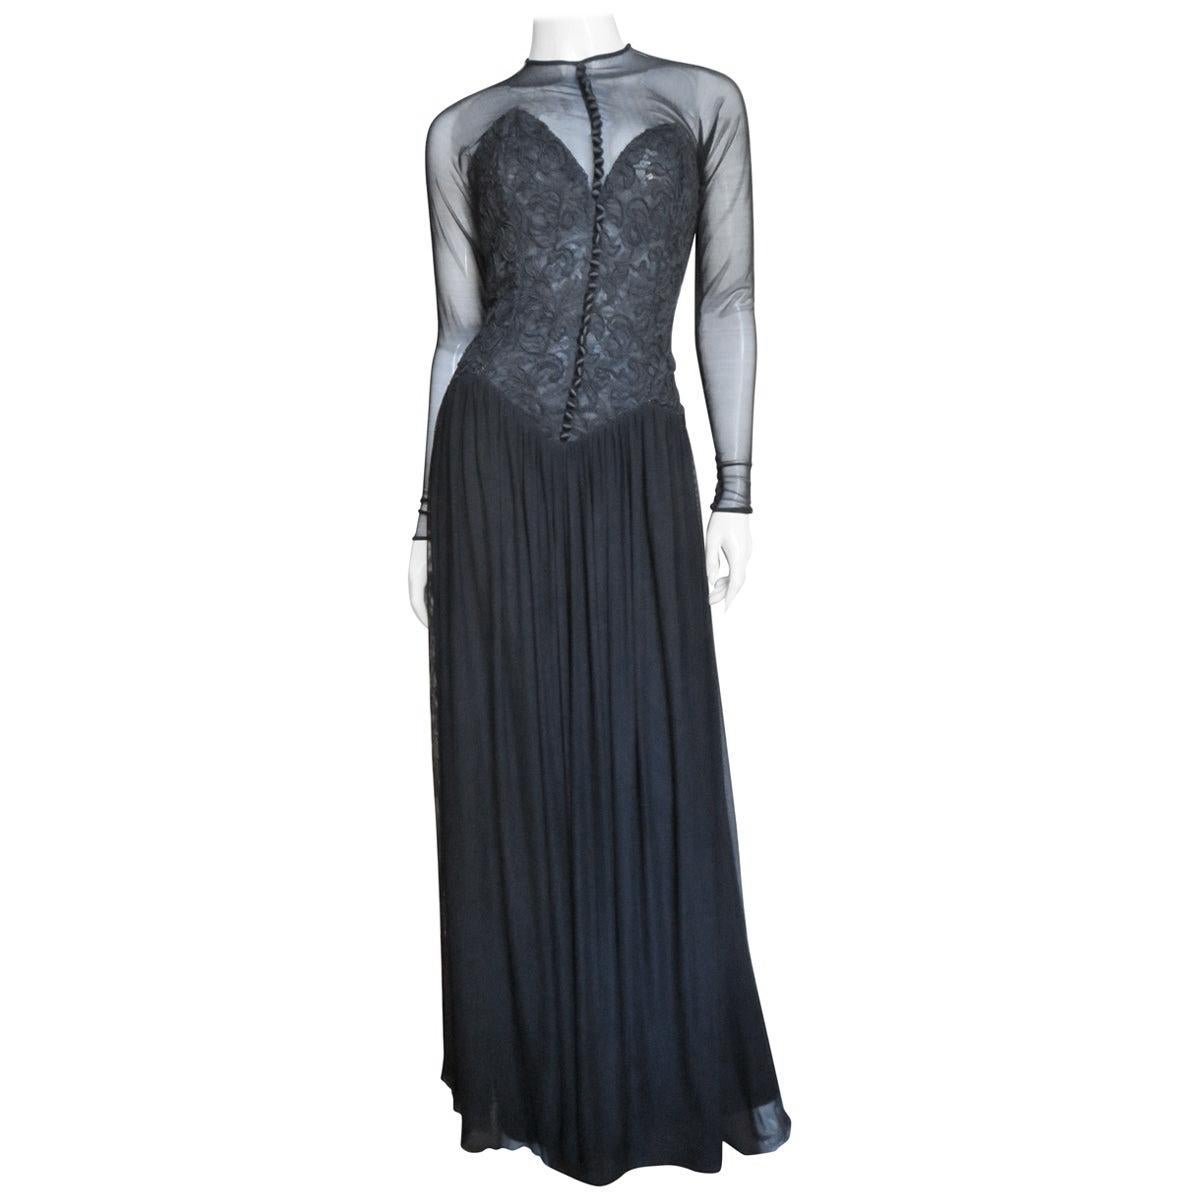 Vicky Tiel Couture Corset Dress Gown 